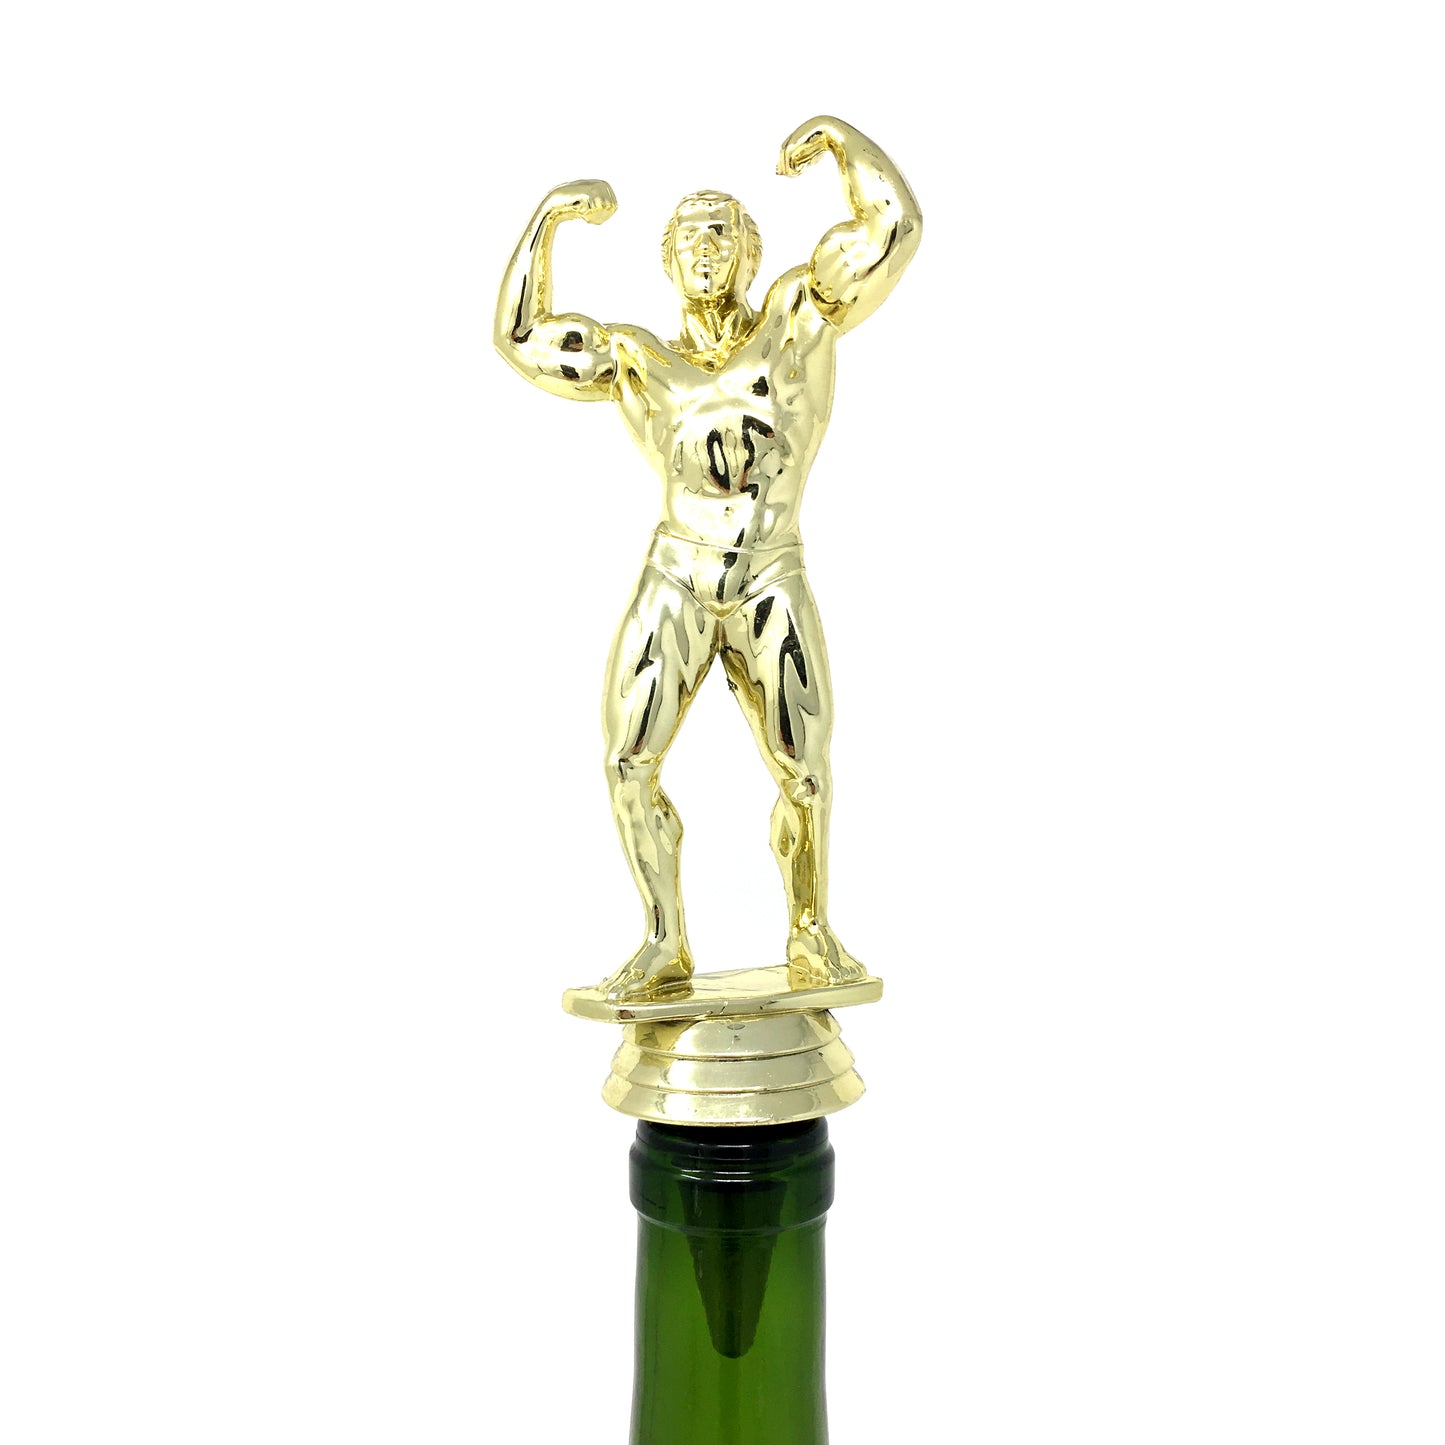 Male Body Builder Trophy Wine Bottle Stopper with Stainless Steel Base